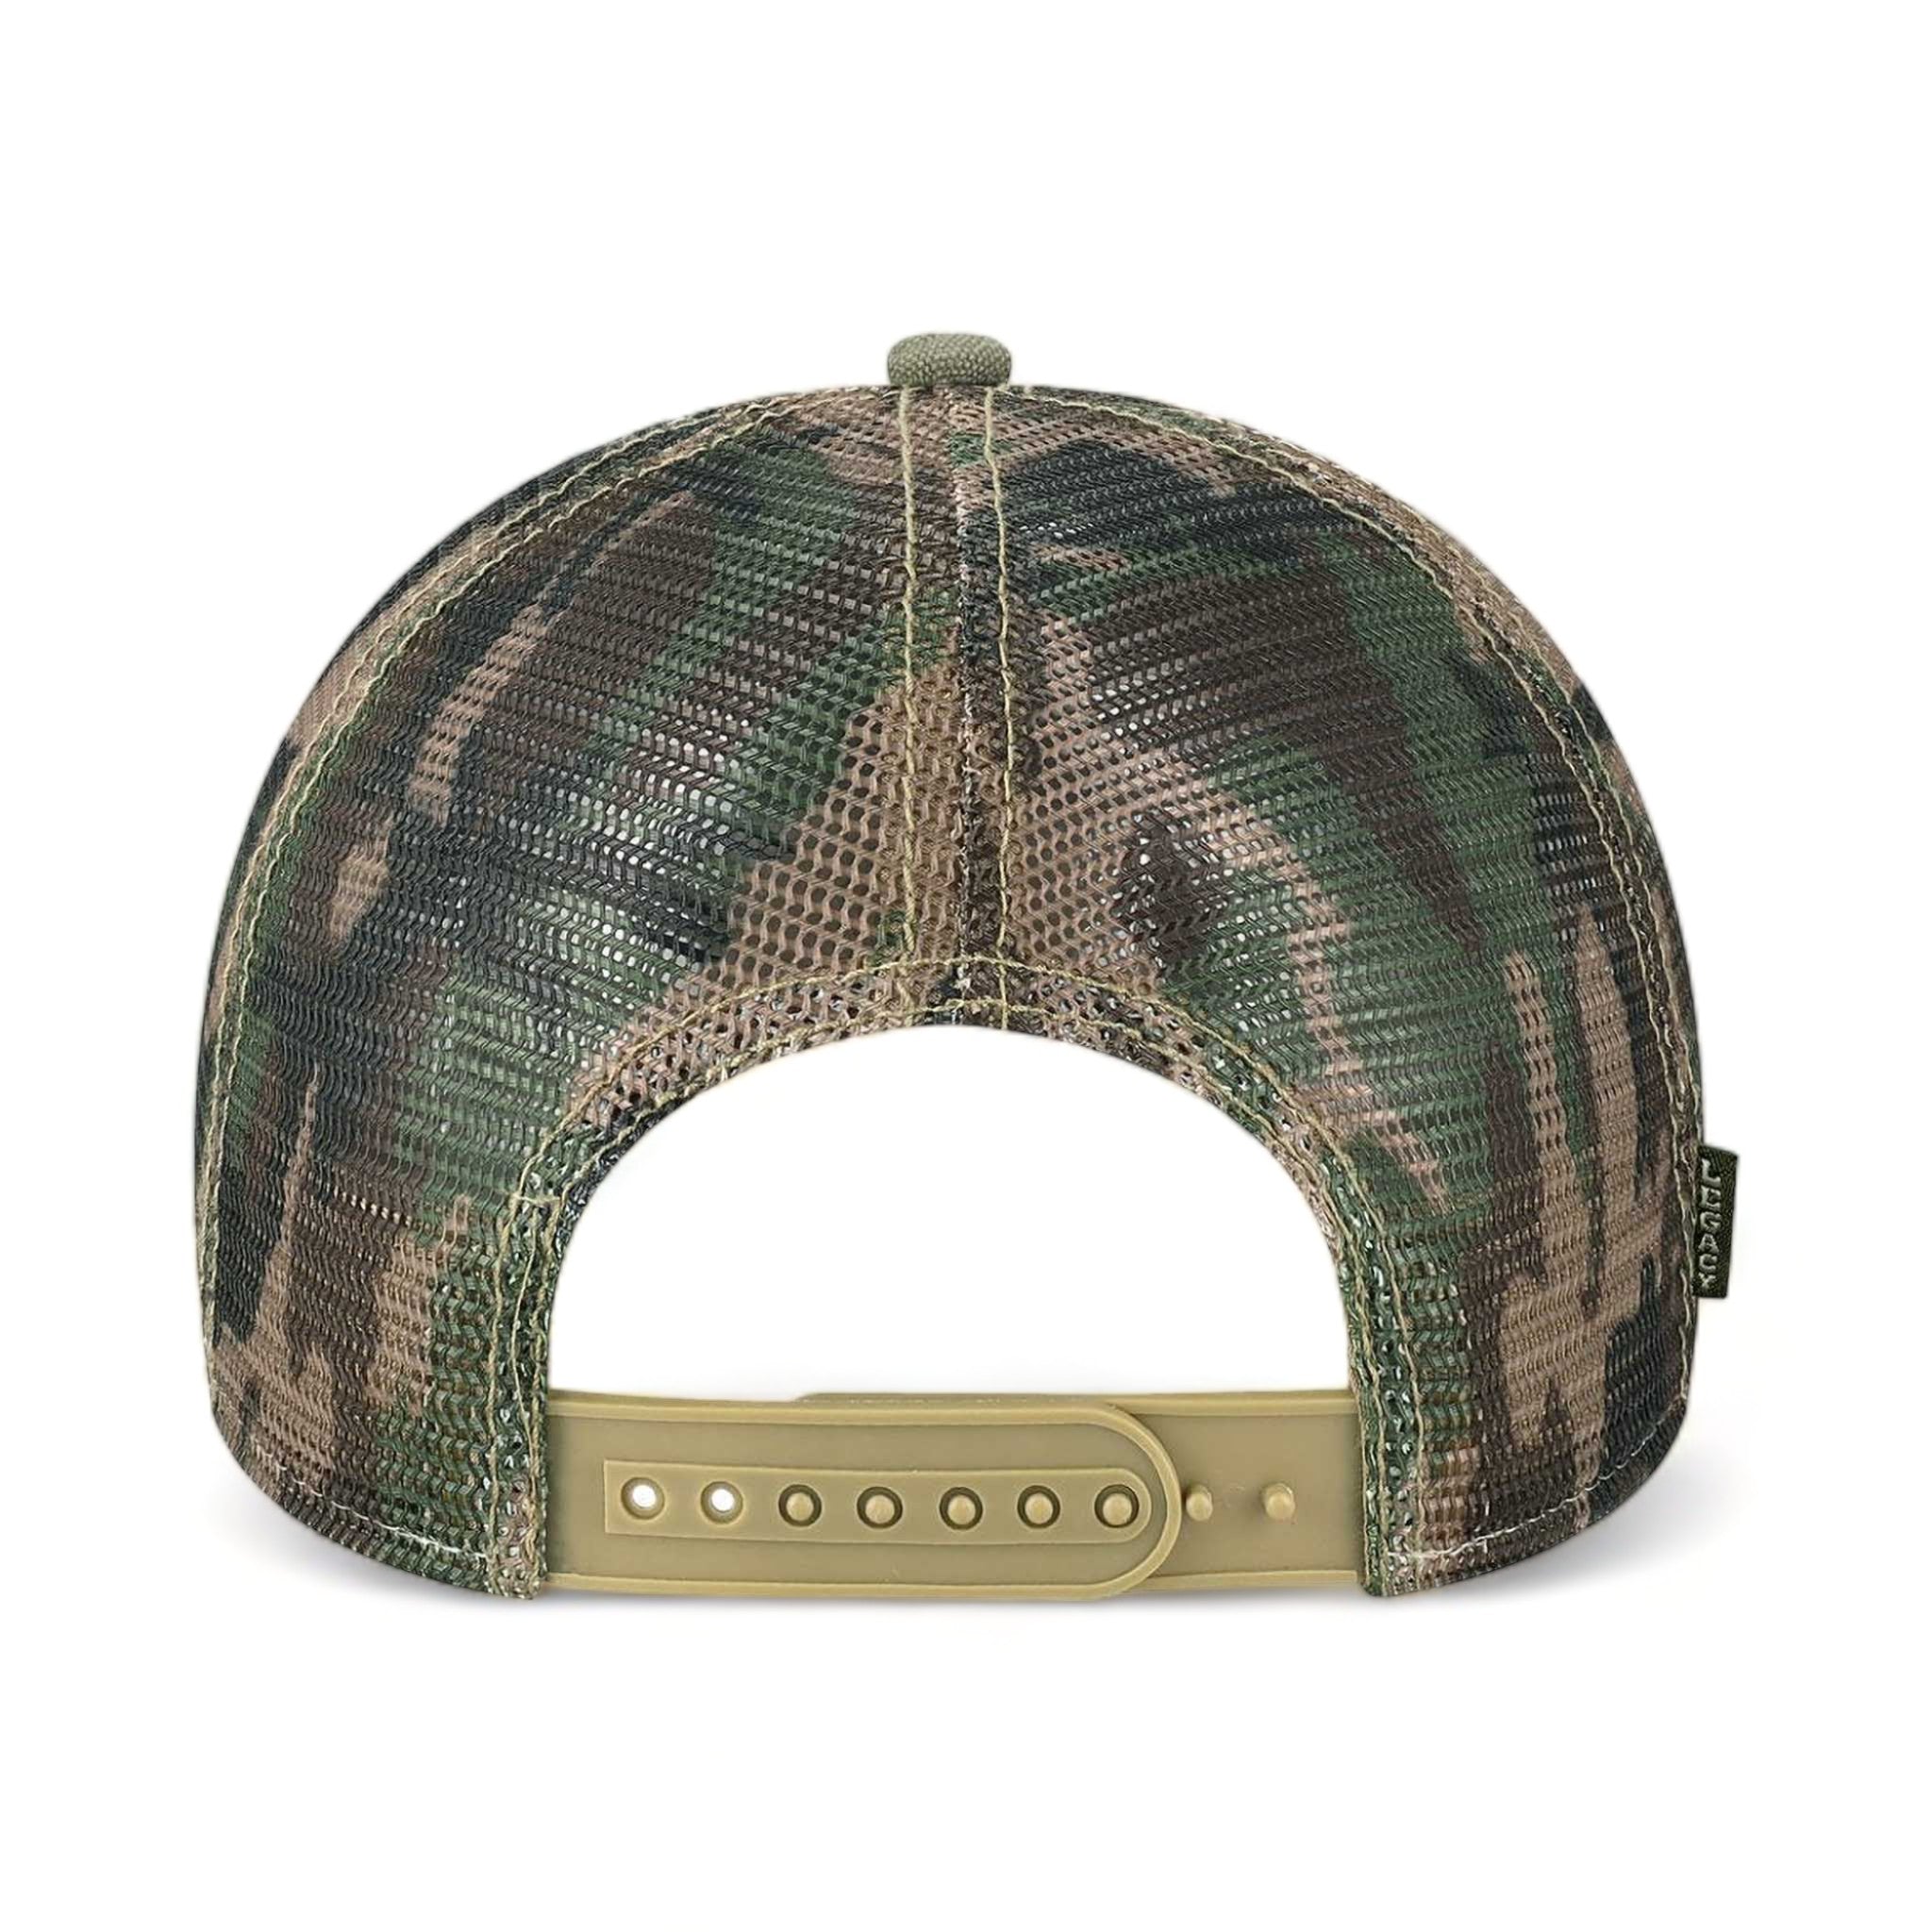 Back view of LEGACY MPS custom hat in khaki, sage and camo mesh